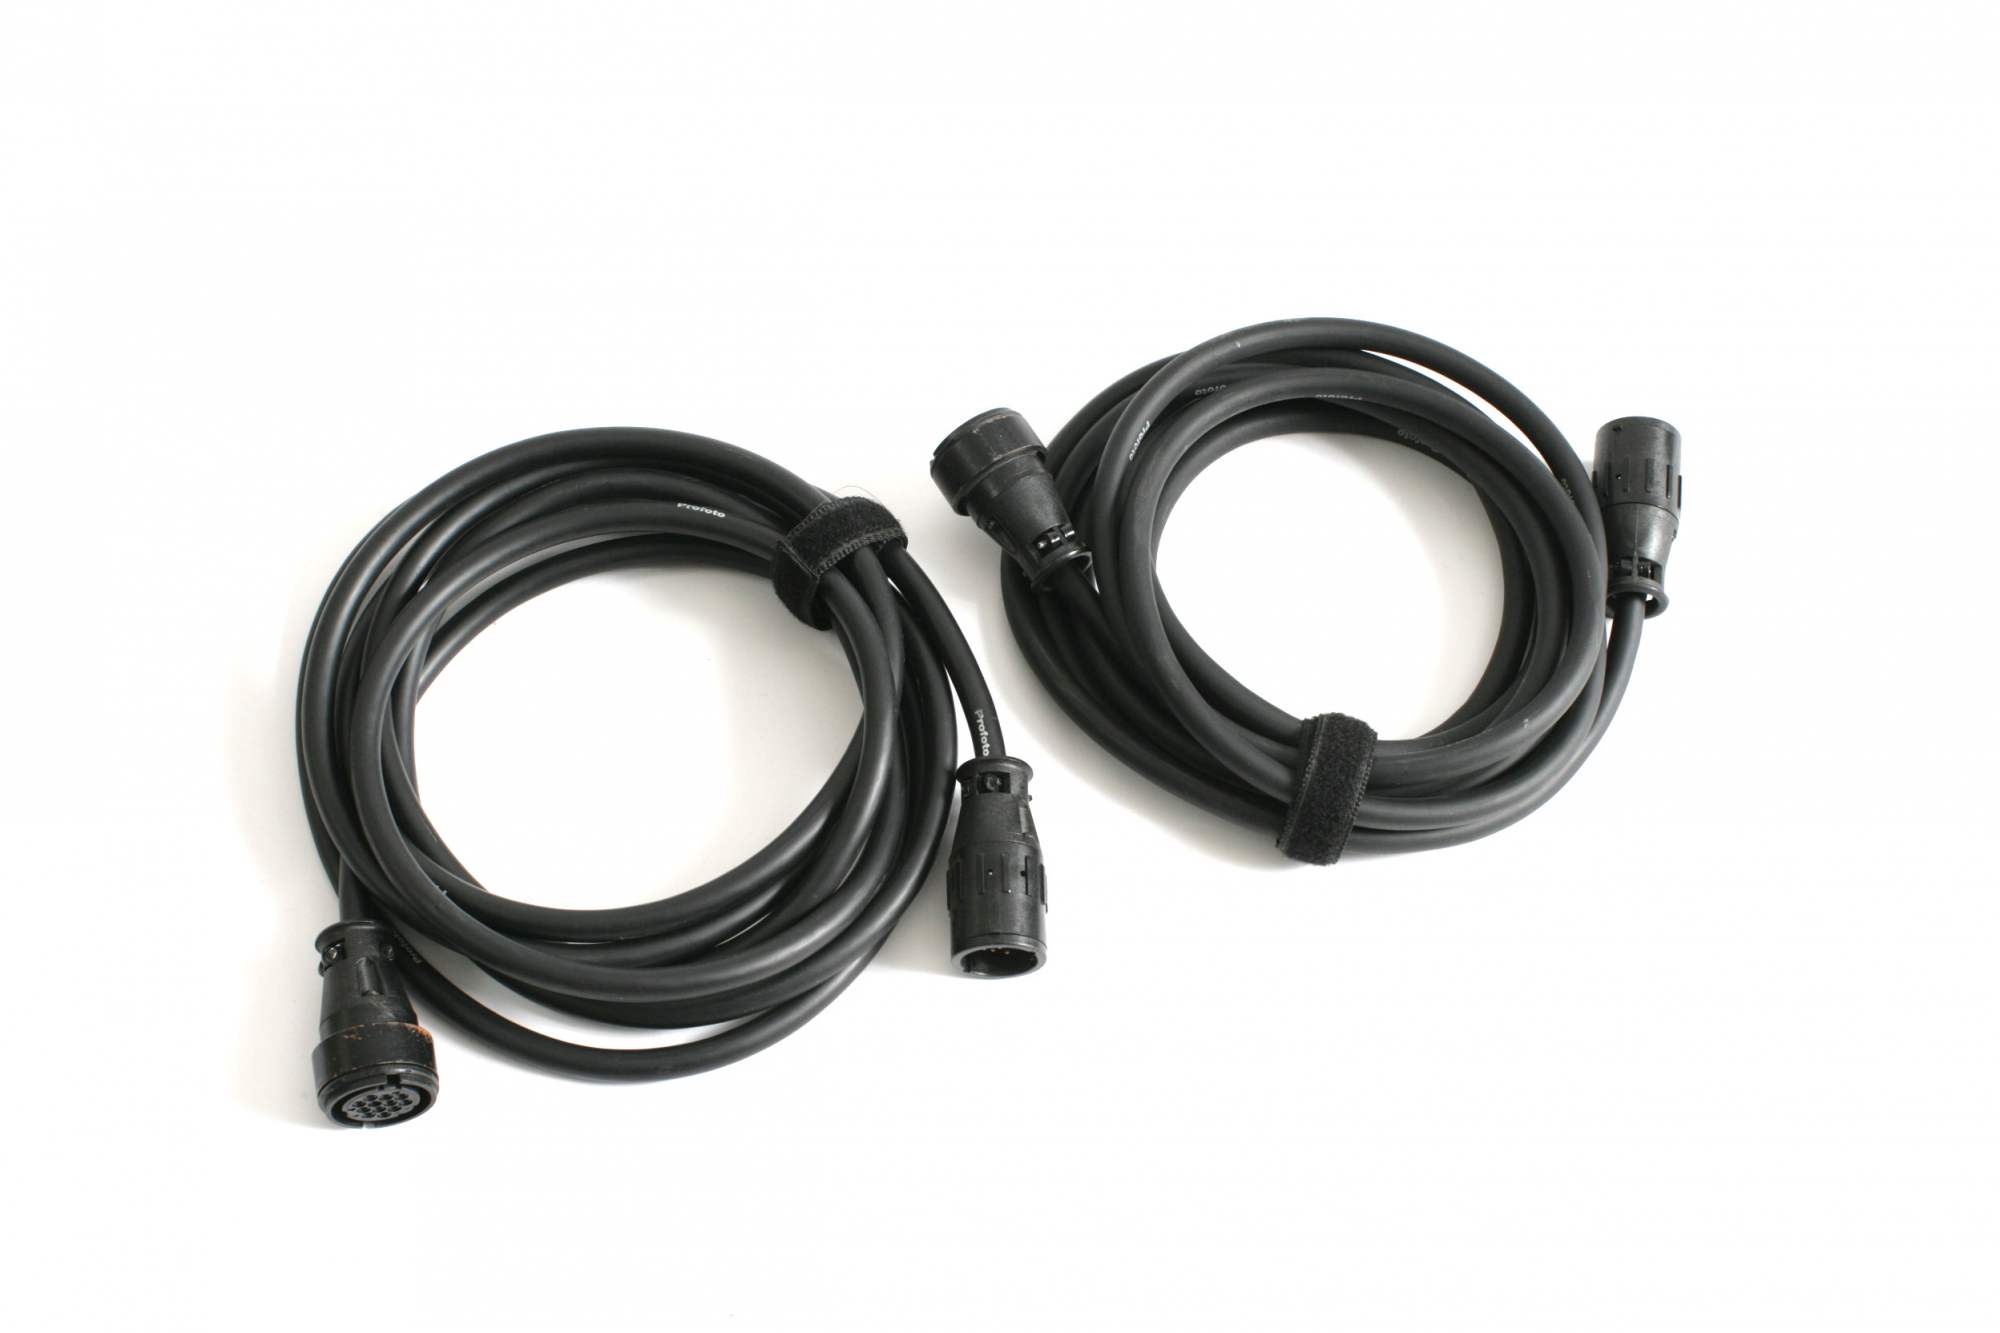 2 x 10 meter Profoto extension cables for 7b Generator